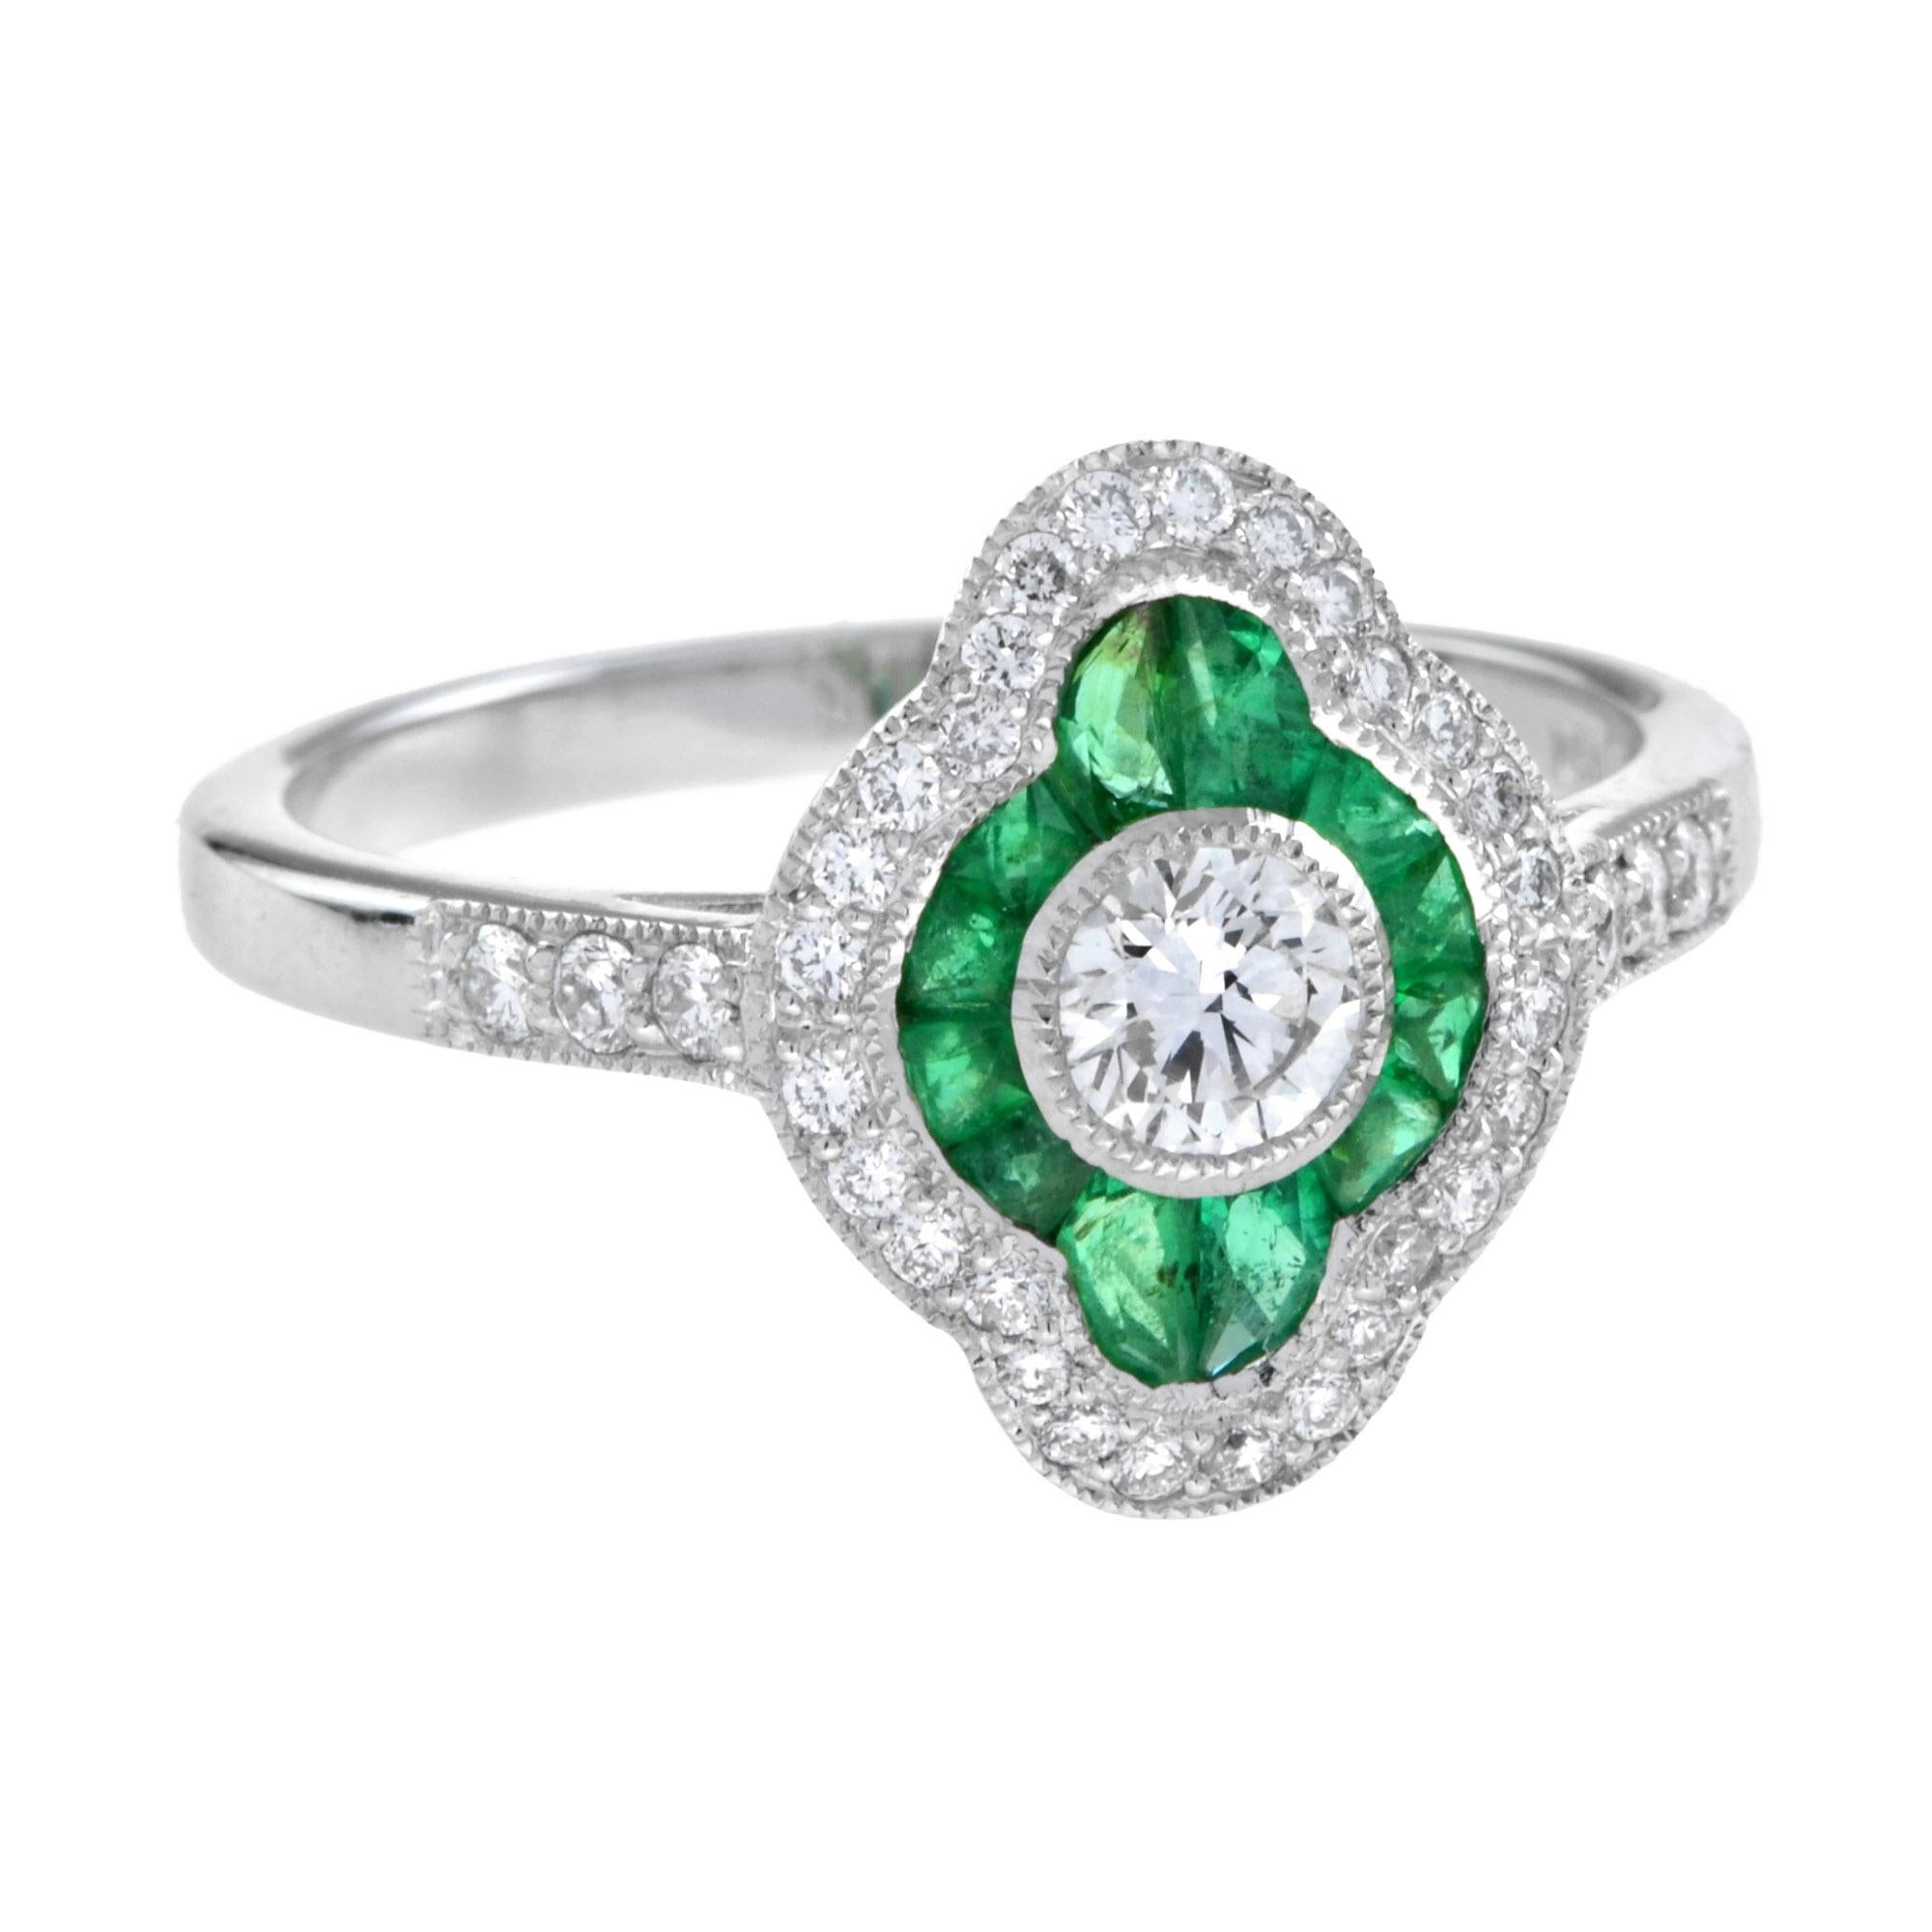 For Sale:  Art Deco Style Diamond and Emerald Engagement Ring in 18K White Gold 2